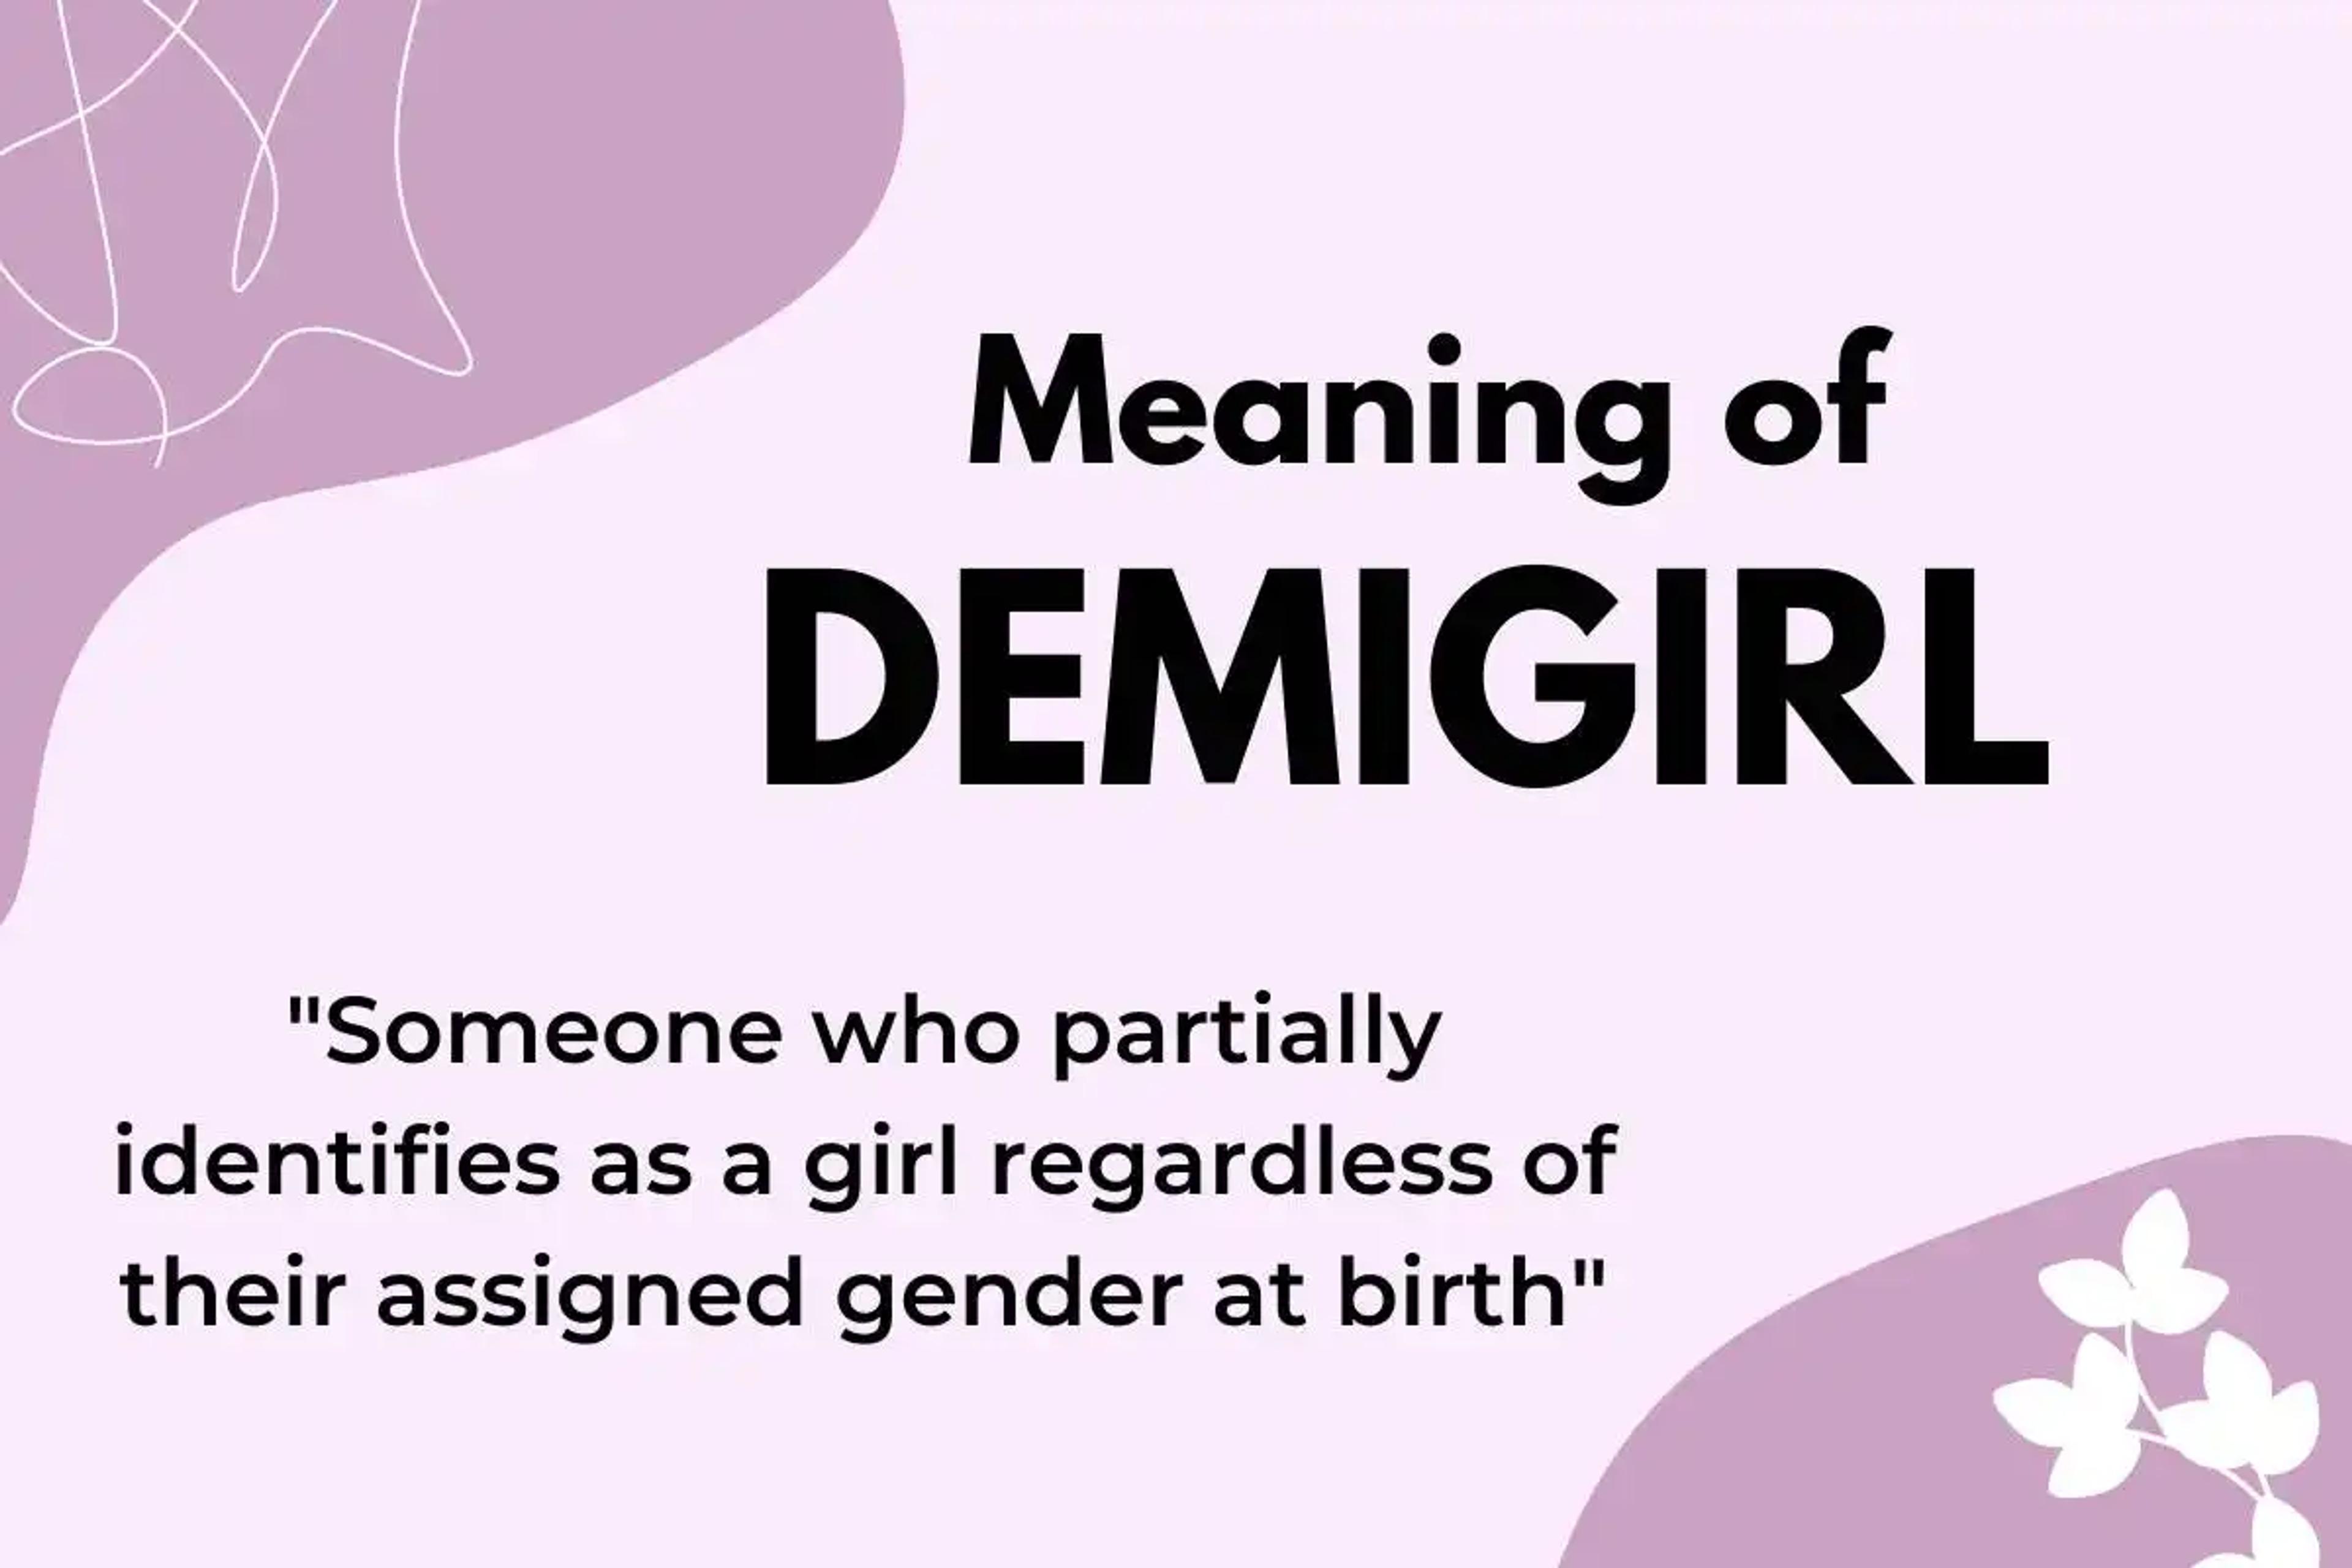 Meaning of demigirl